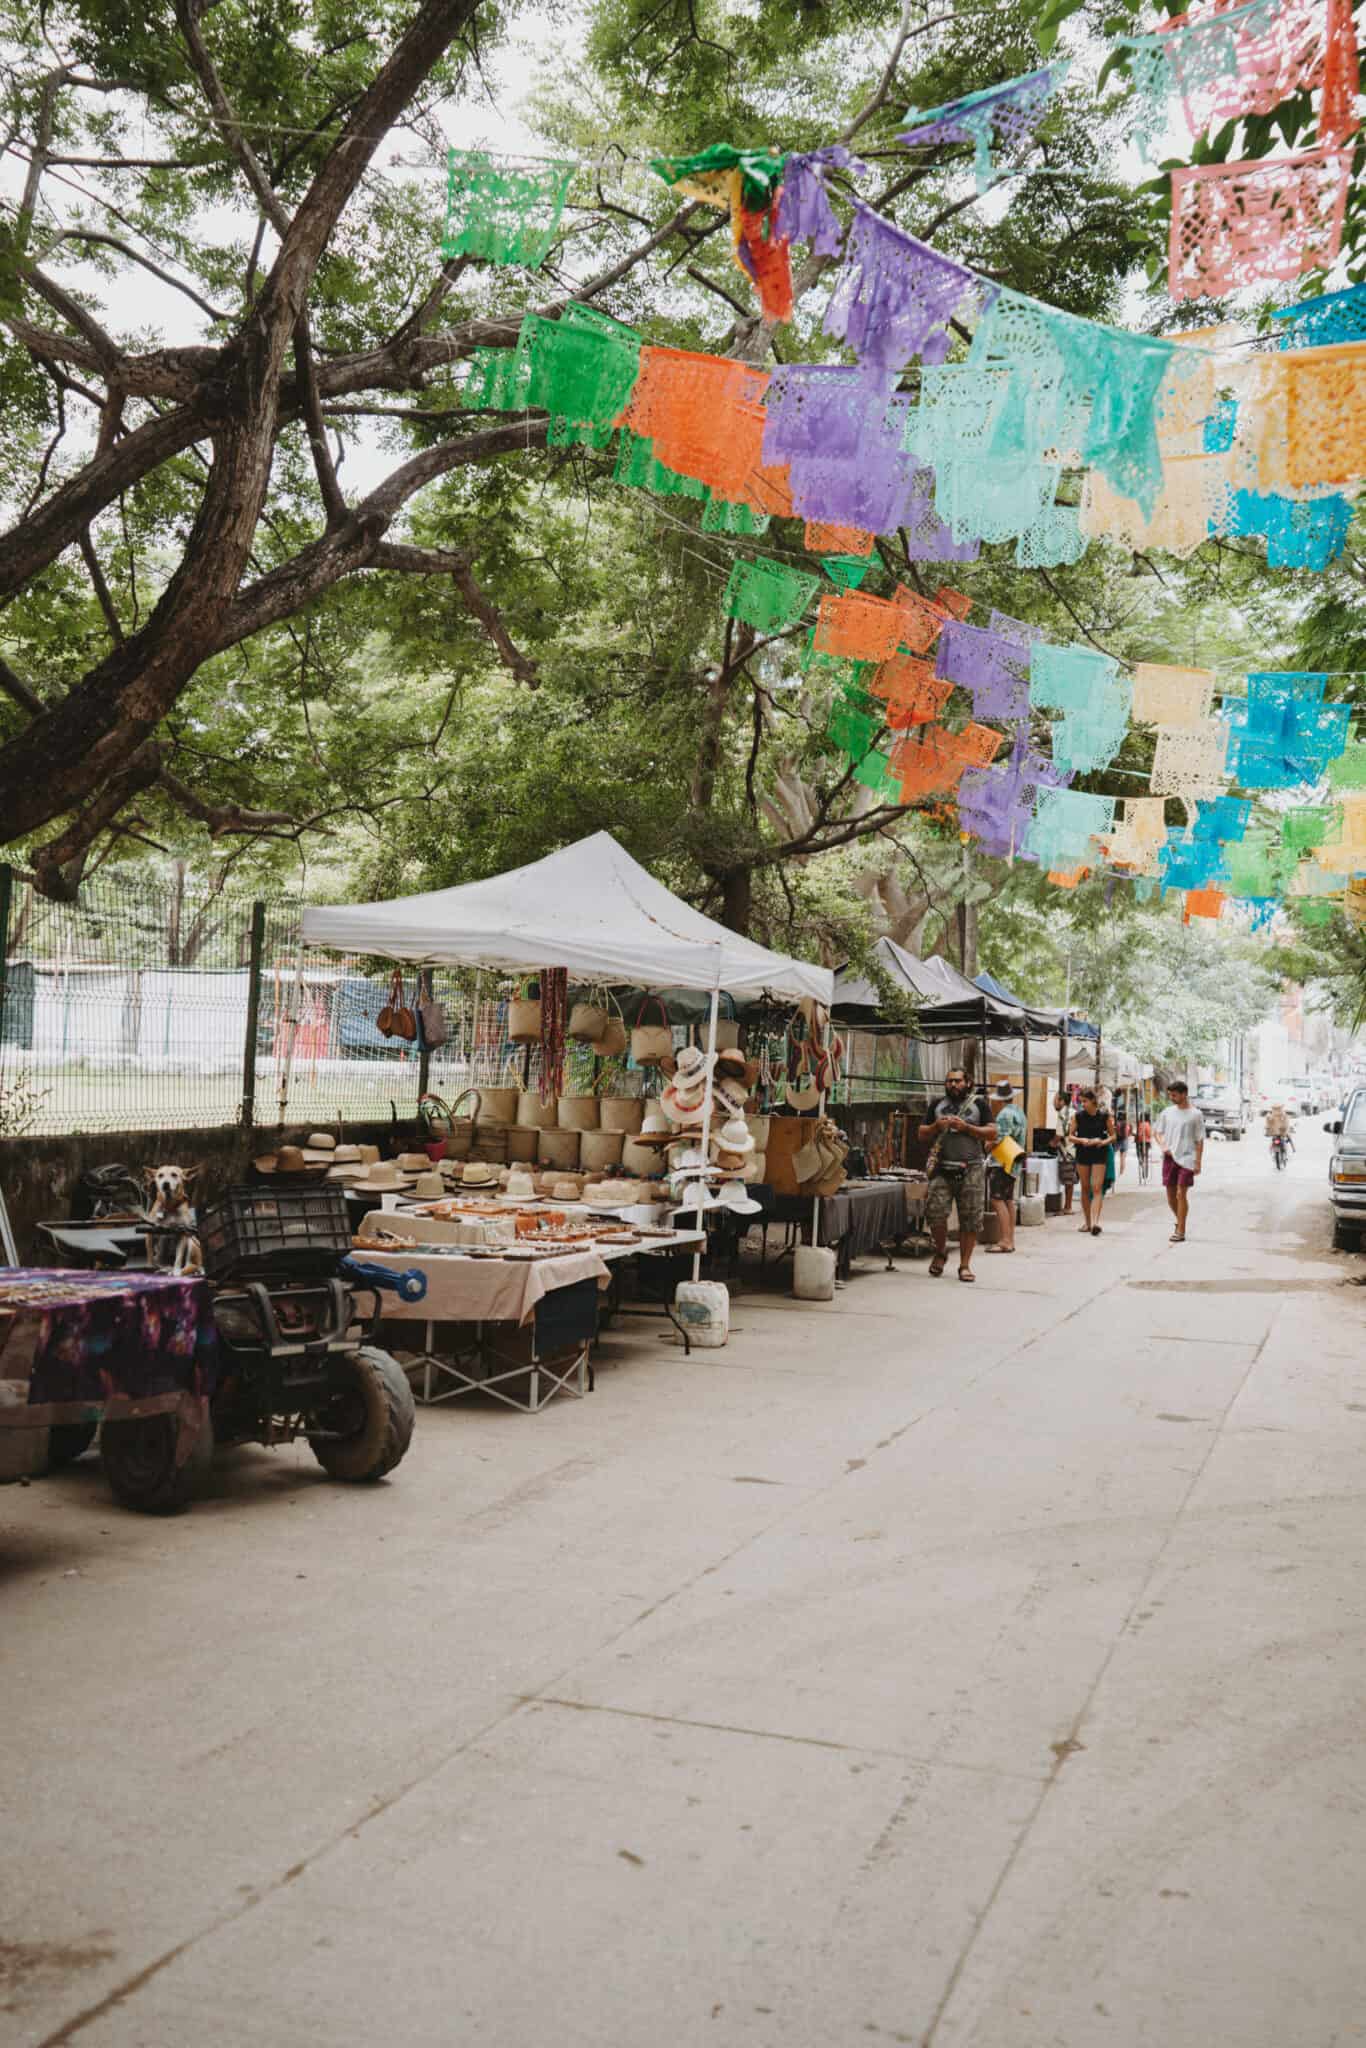 A Sayulita street market adorned with colorful flags hanging from trees.